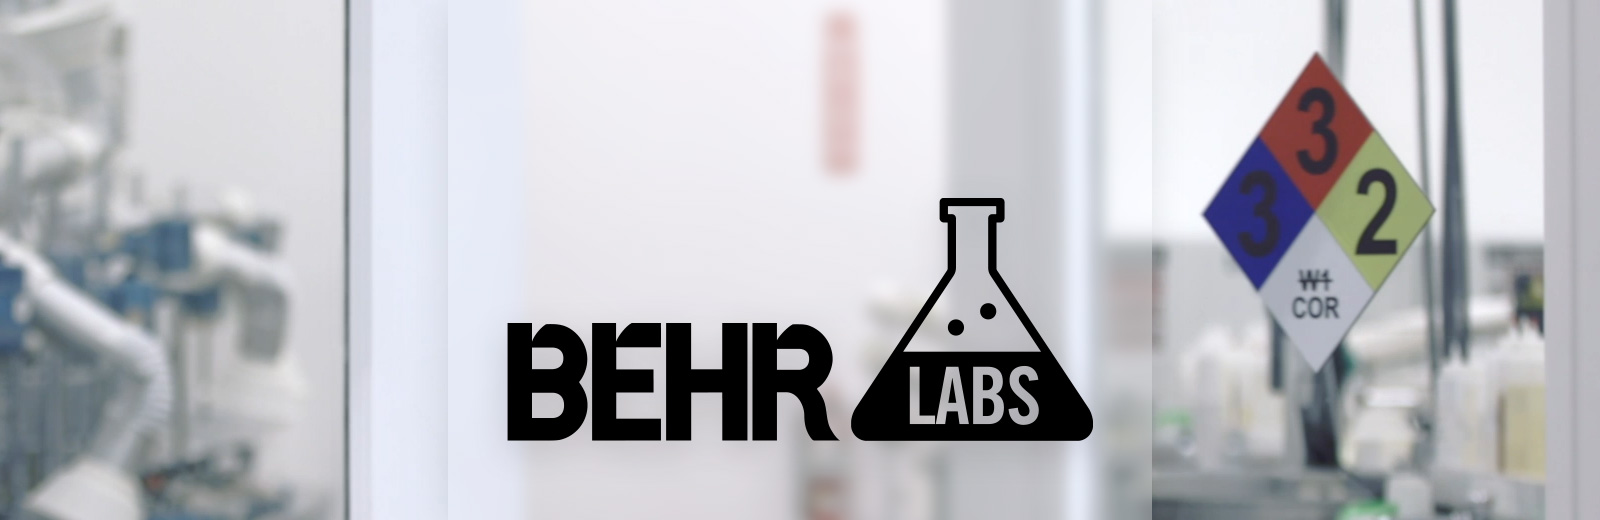 Desktop view of an image of a Laboratory with a title BEHR LABS